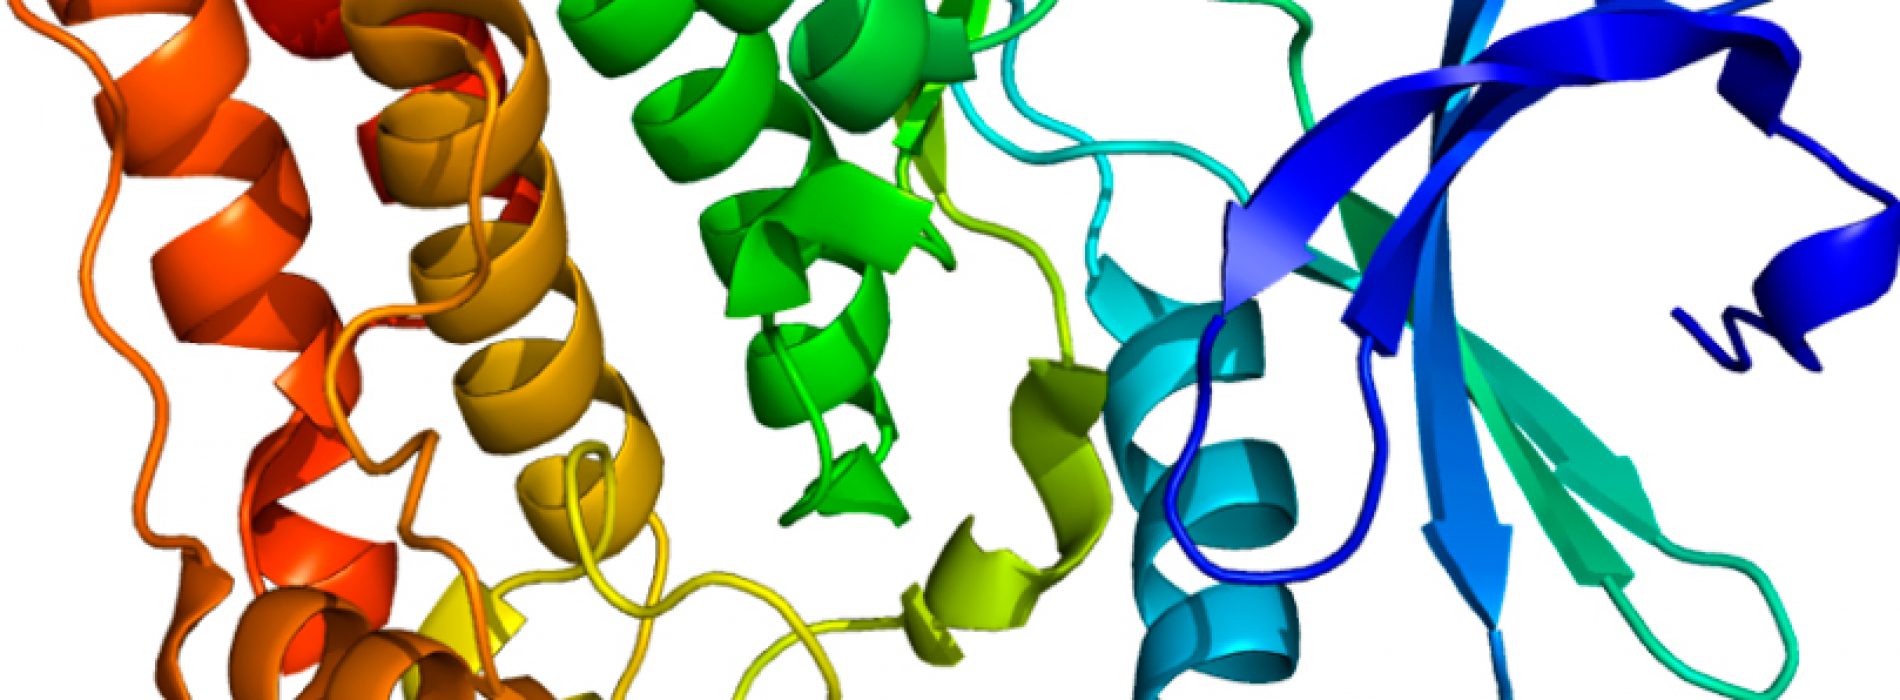 PROTEIN MISFOLDING DISORDERS